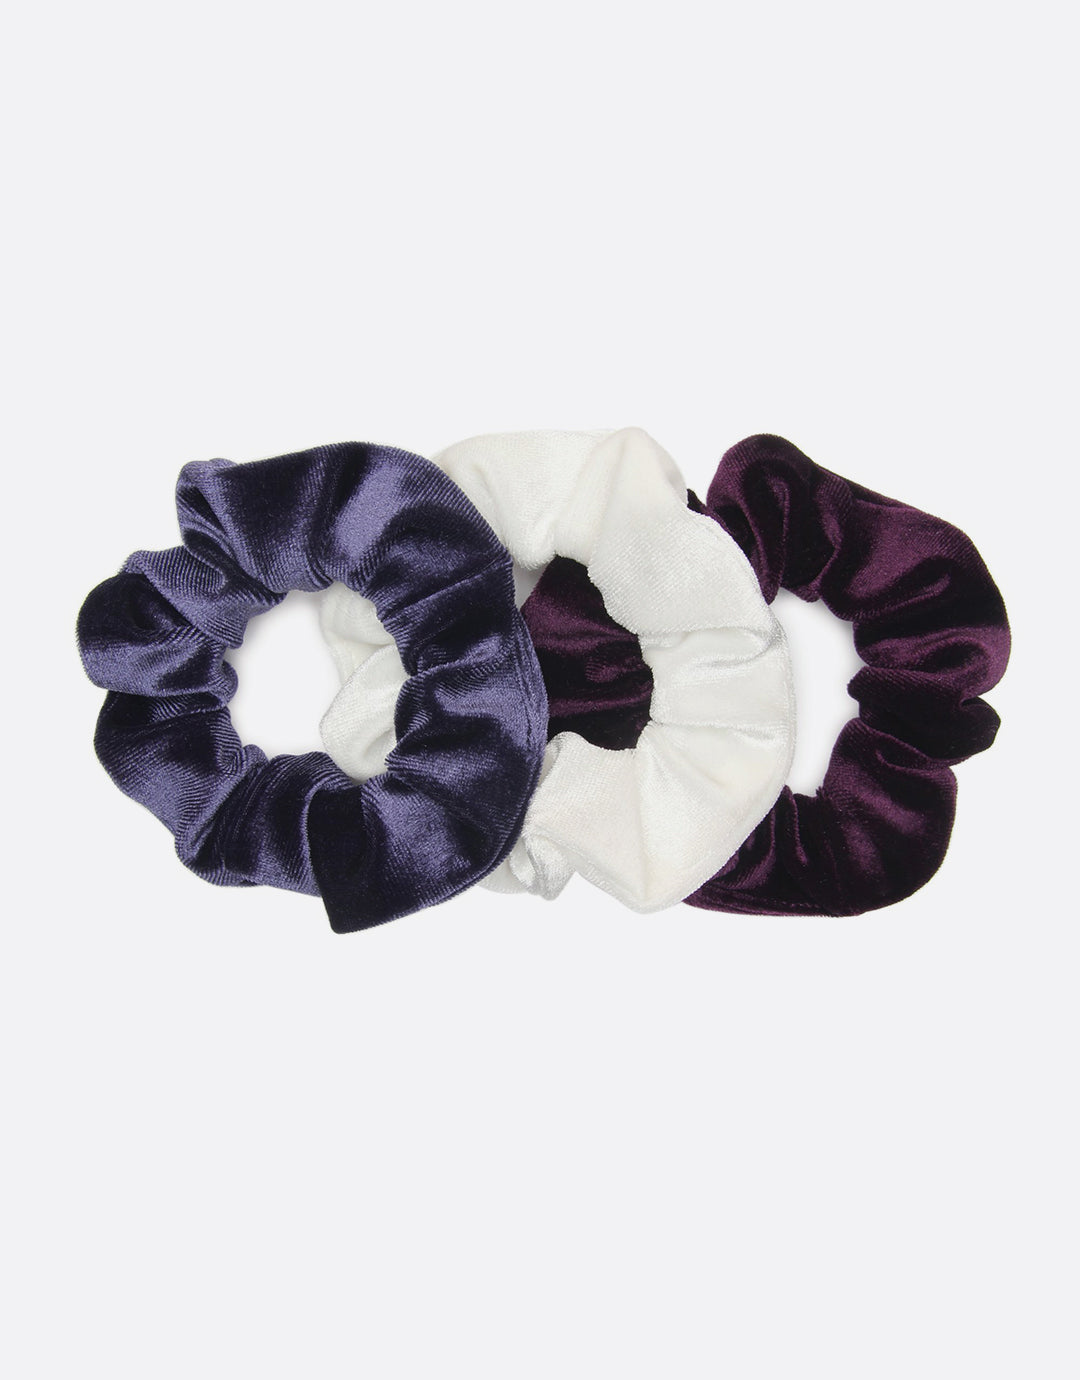 BANDED Women’s Premium Hair Accessories - Giverny - 3 Pack Velvet Scrunchies